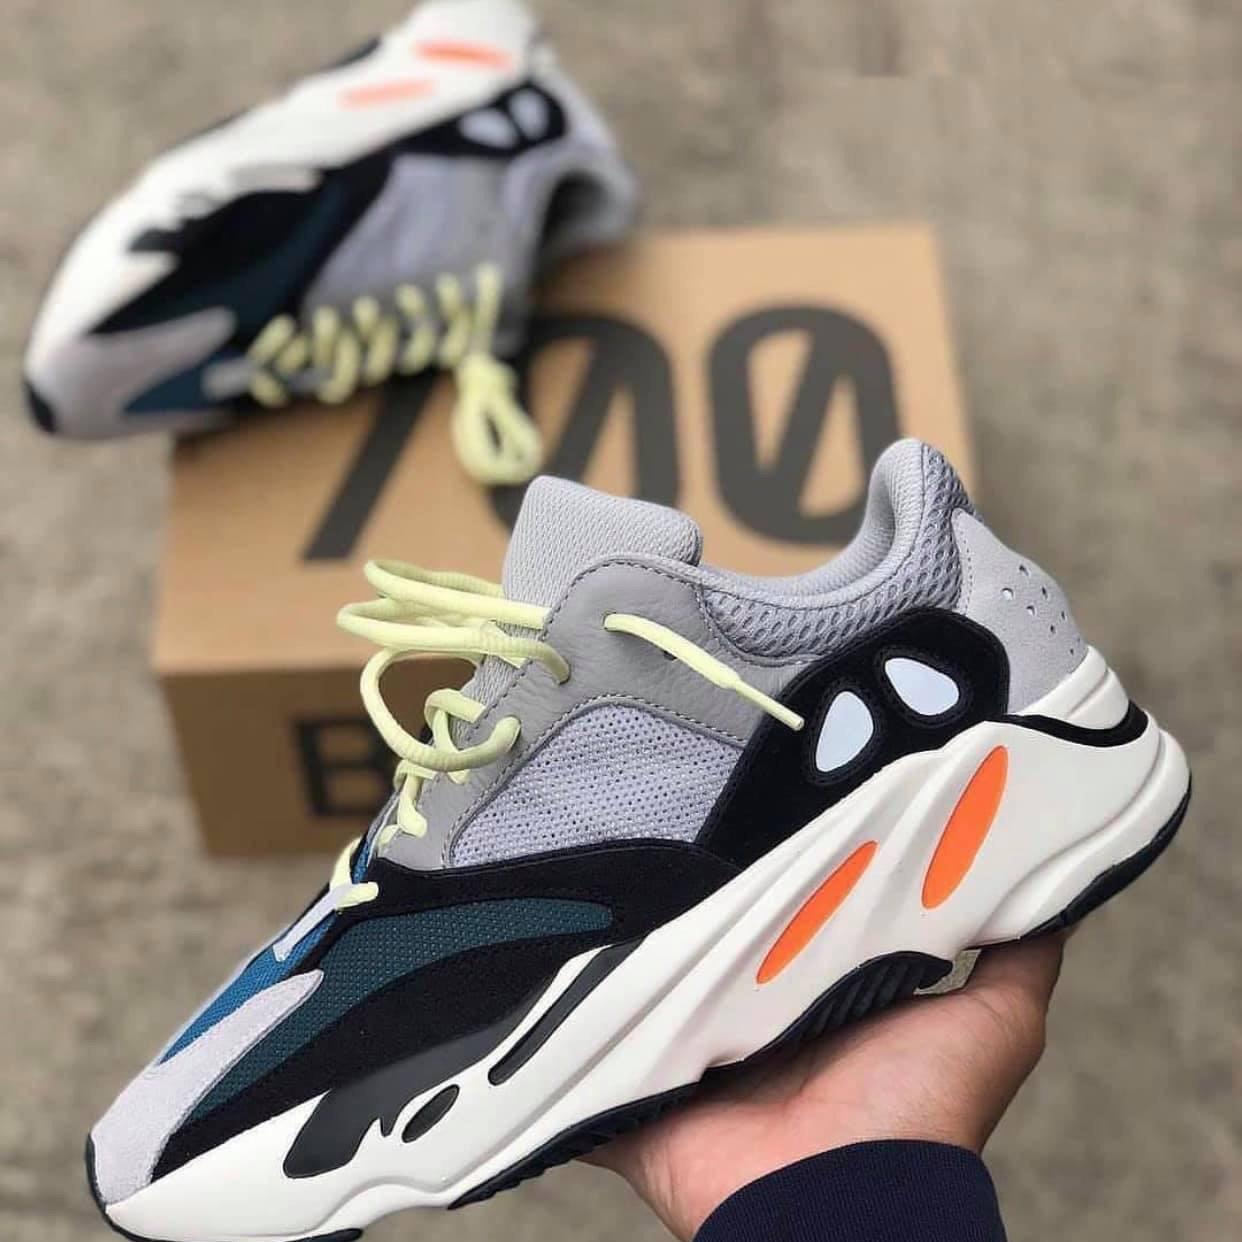 Adidas Yeezy 700 Wave Runner Mens size 